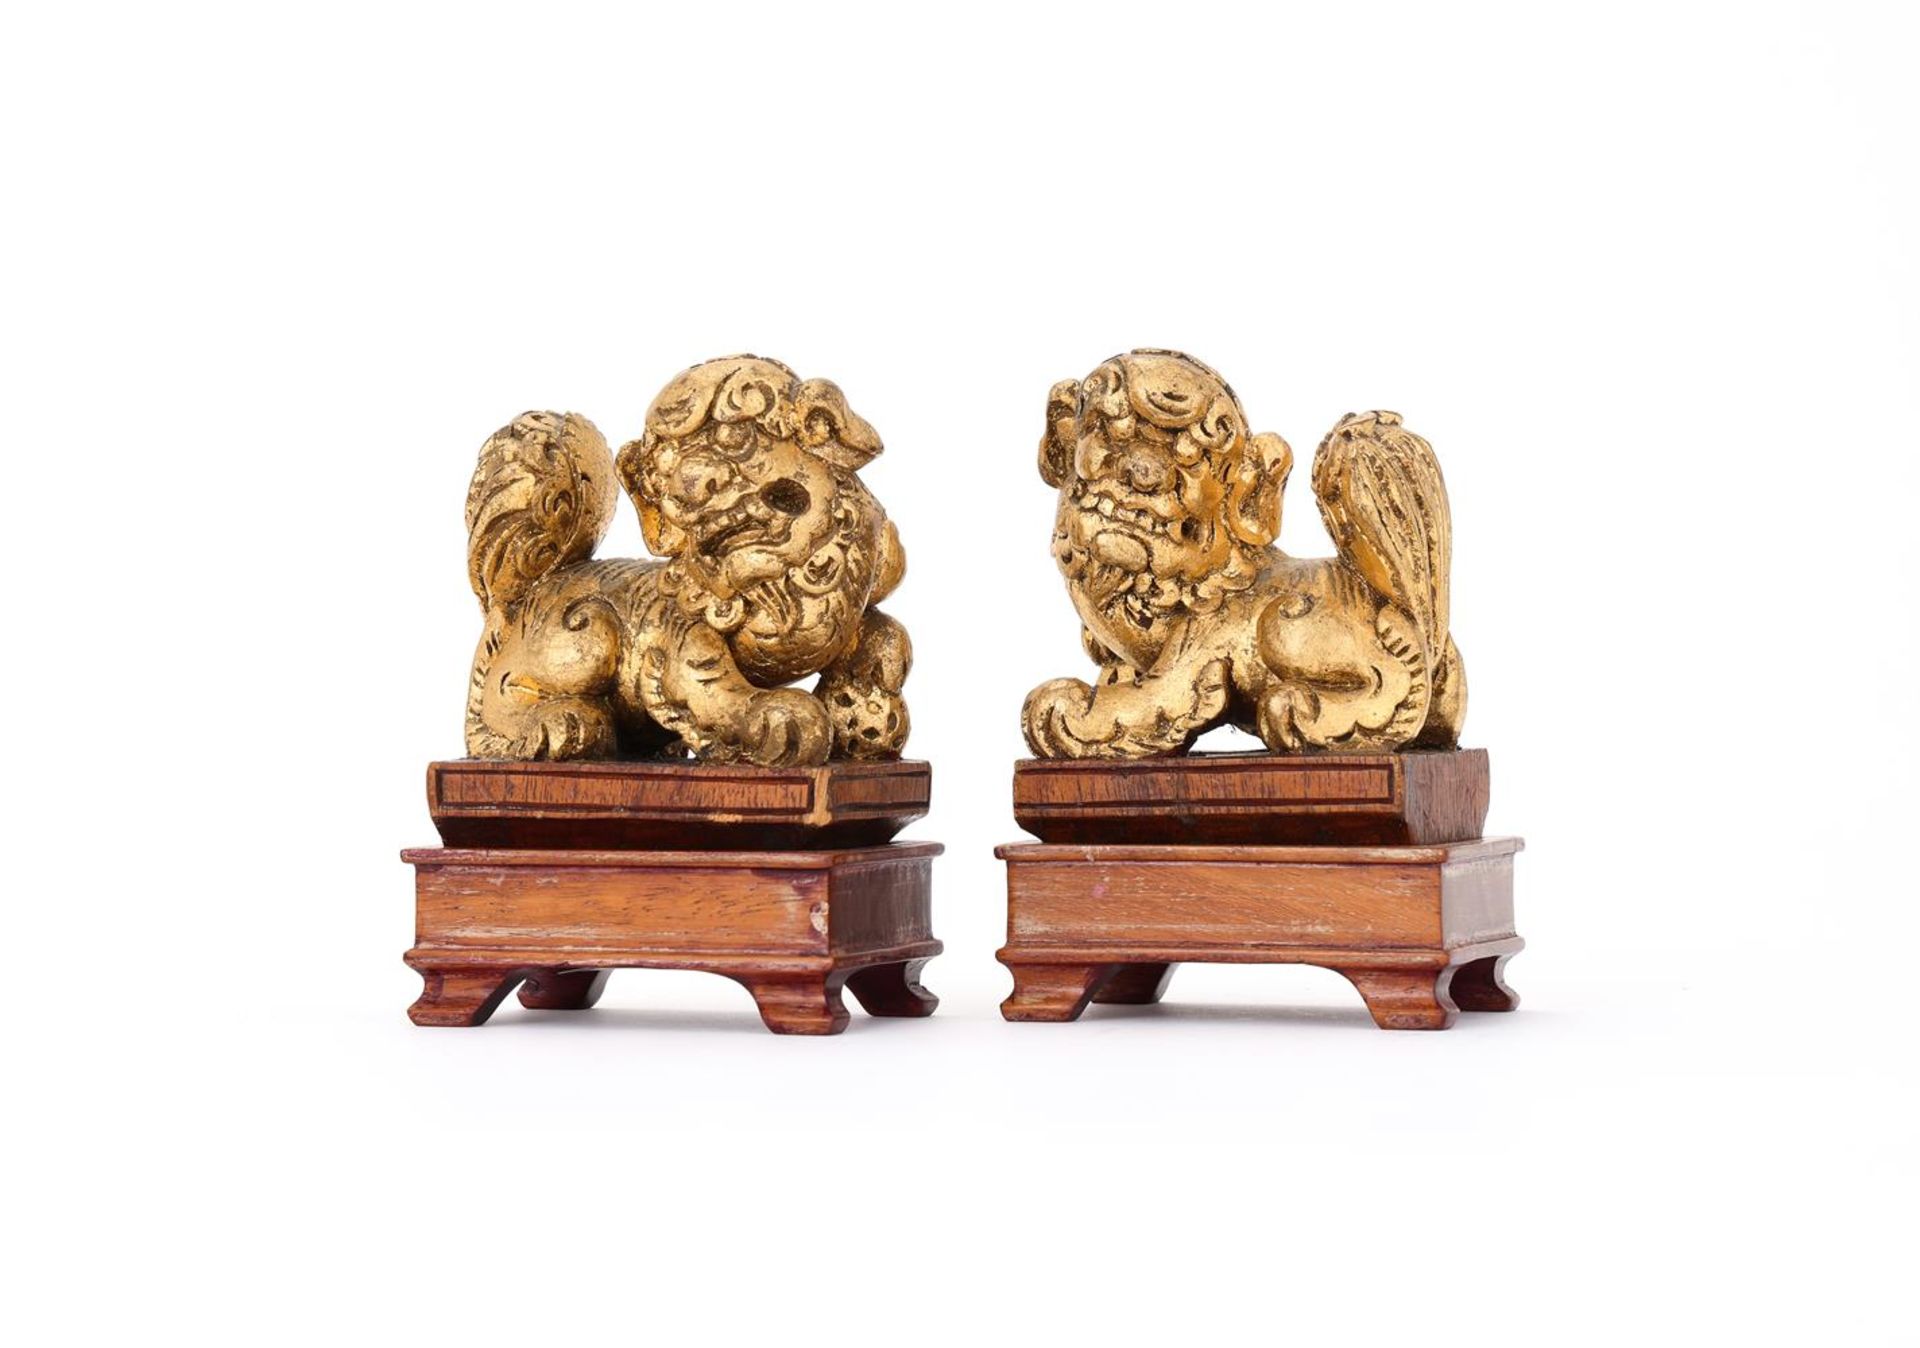 A pair of Chinese jadeite Buddhist lions - Image 4 of 5